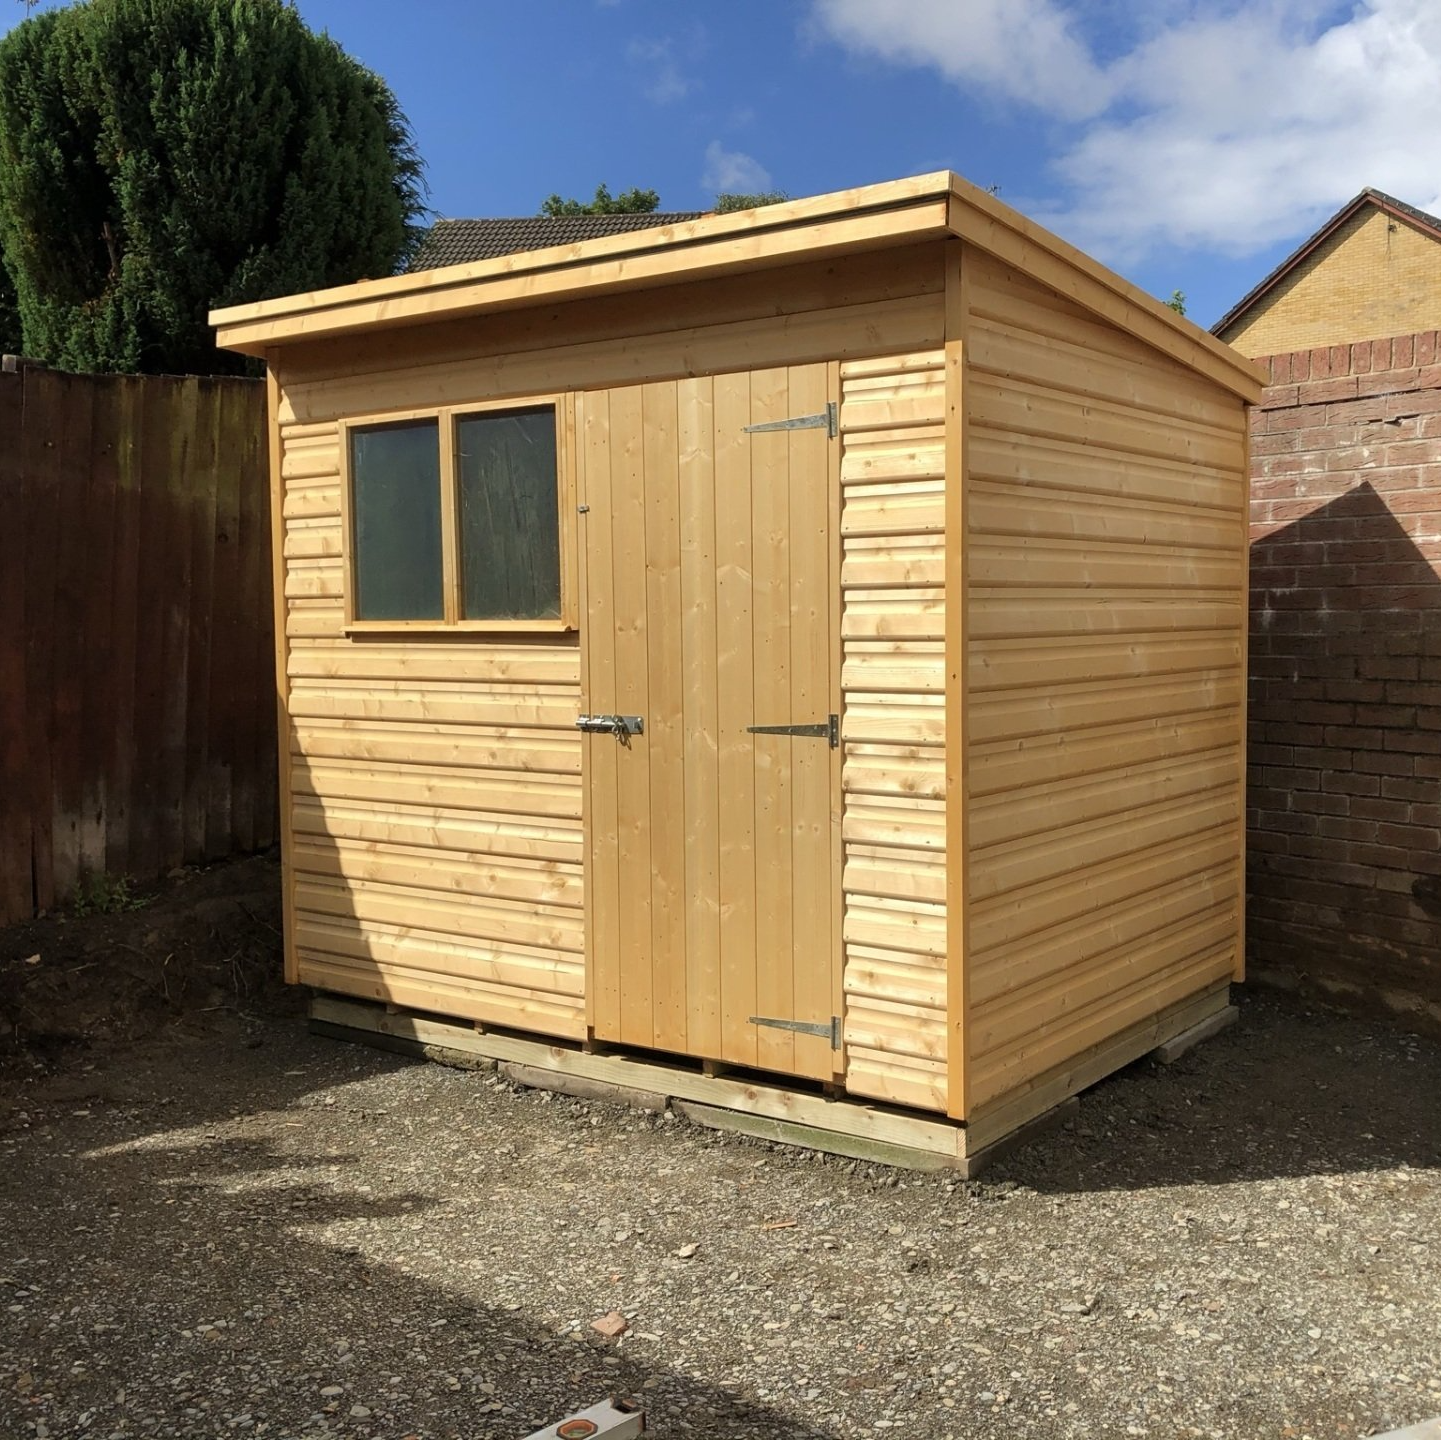 8' x 6' Pent shed sloping front to back with double windows on the left and door on the right